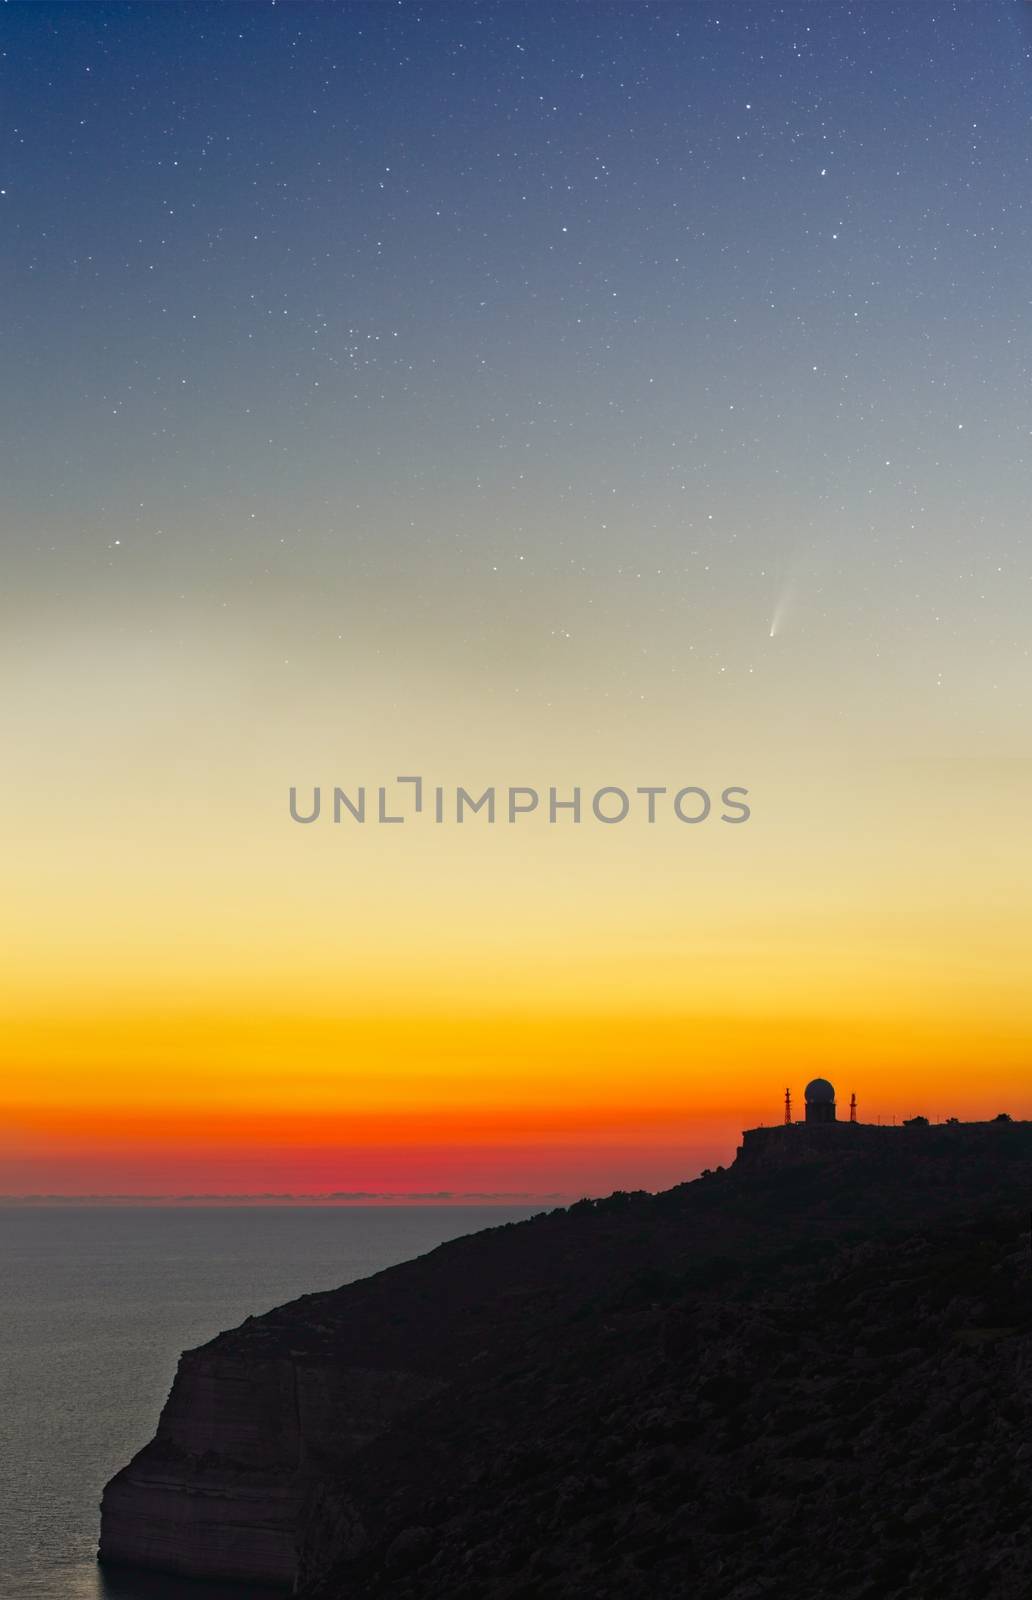 Comet C/2020 F3 (NEOWISE) and The Big Dipper grace the sky over the Dingli Radar Station right after sunset on a super-clear evening on the 21st July 2020